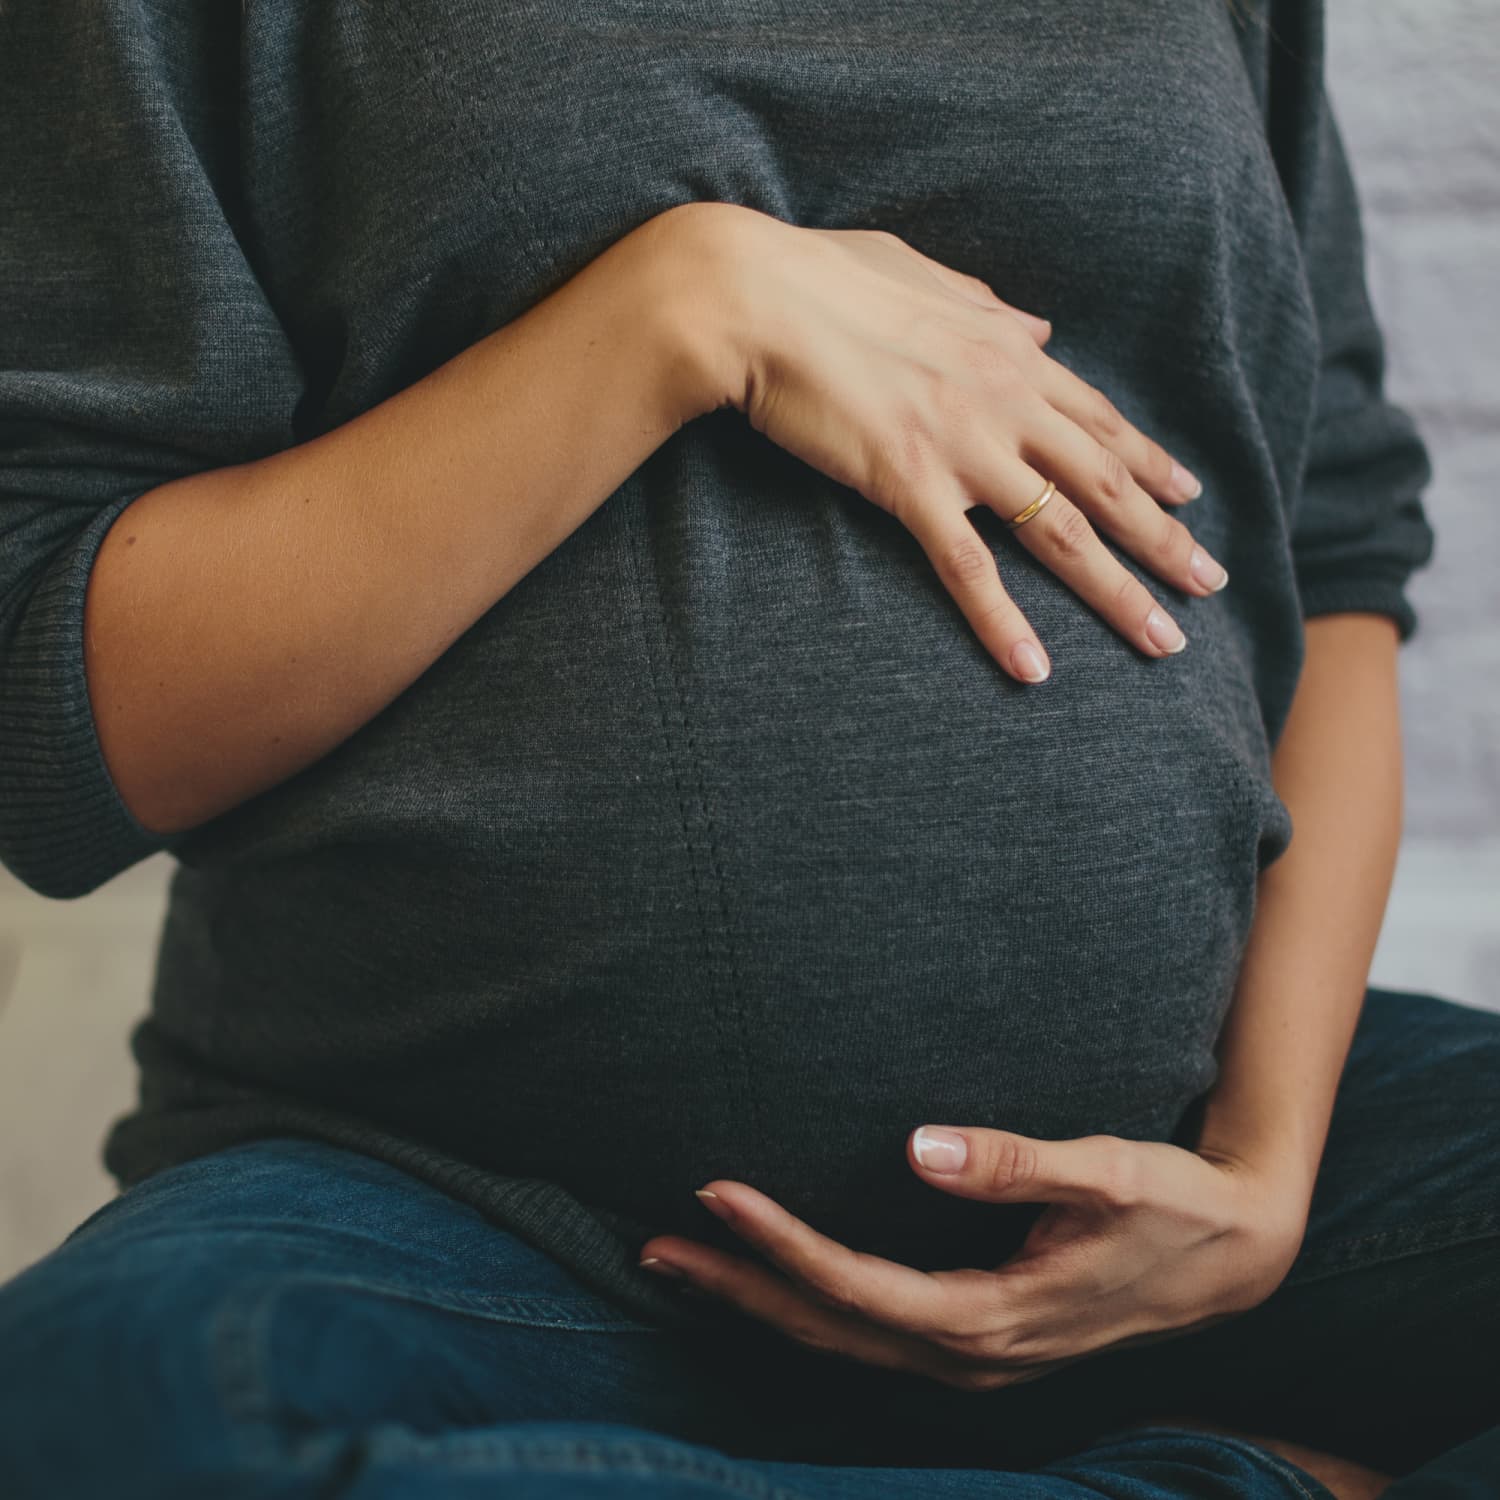 Pregnancy at 40: Health Risks, and What to Expect